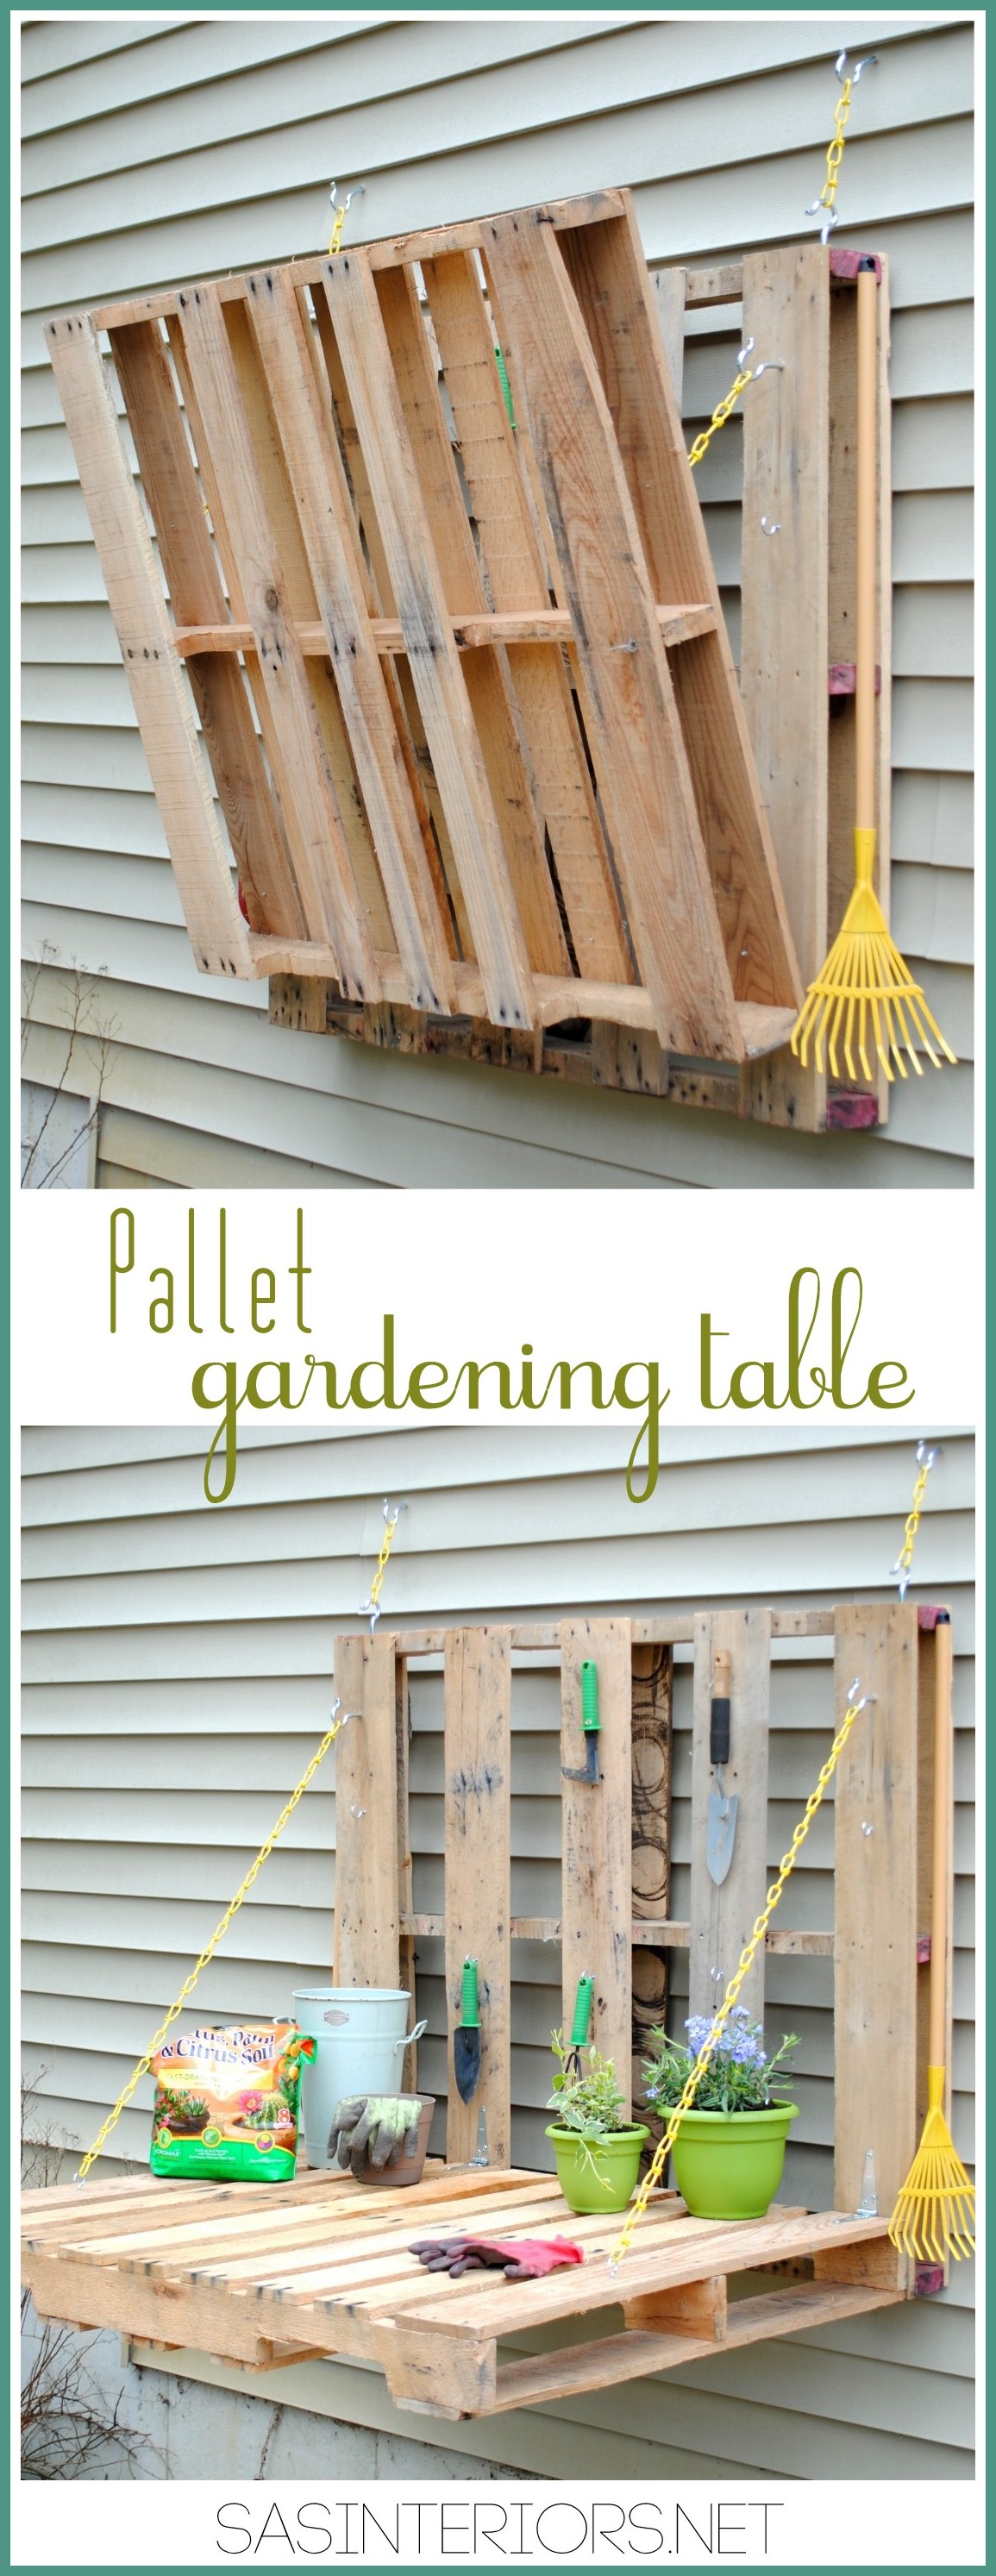 What are some things you can make from pallets?